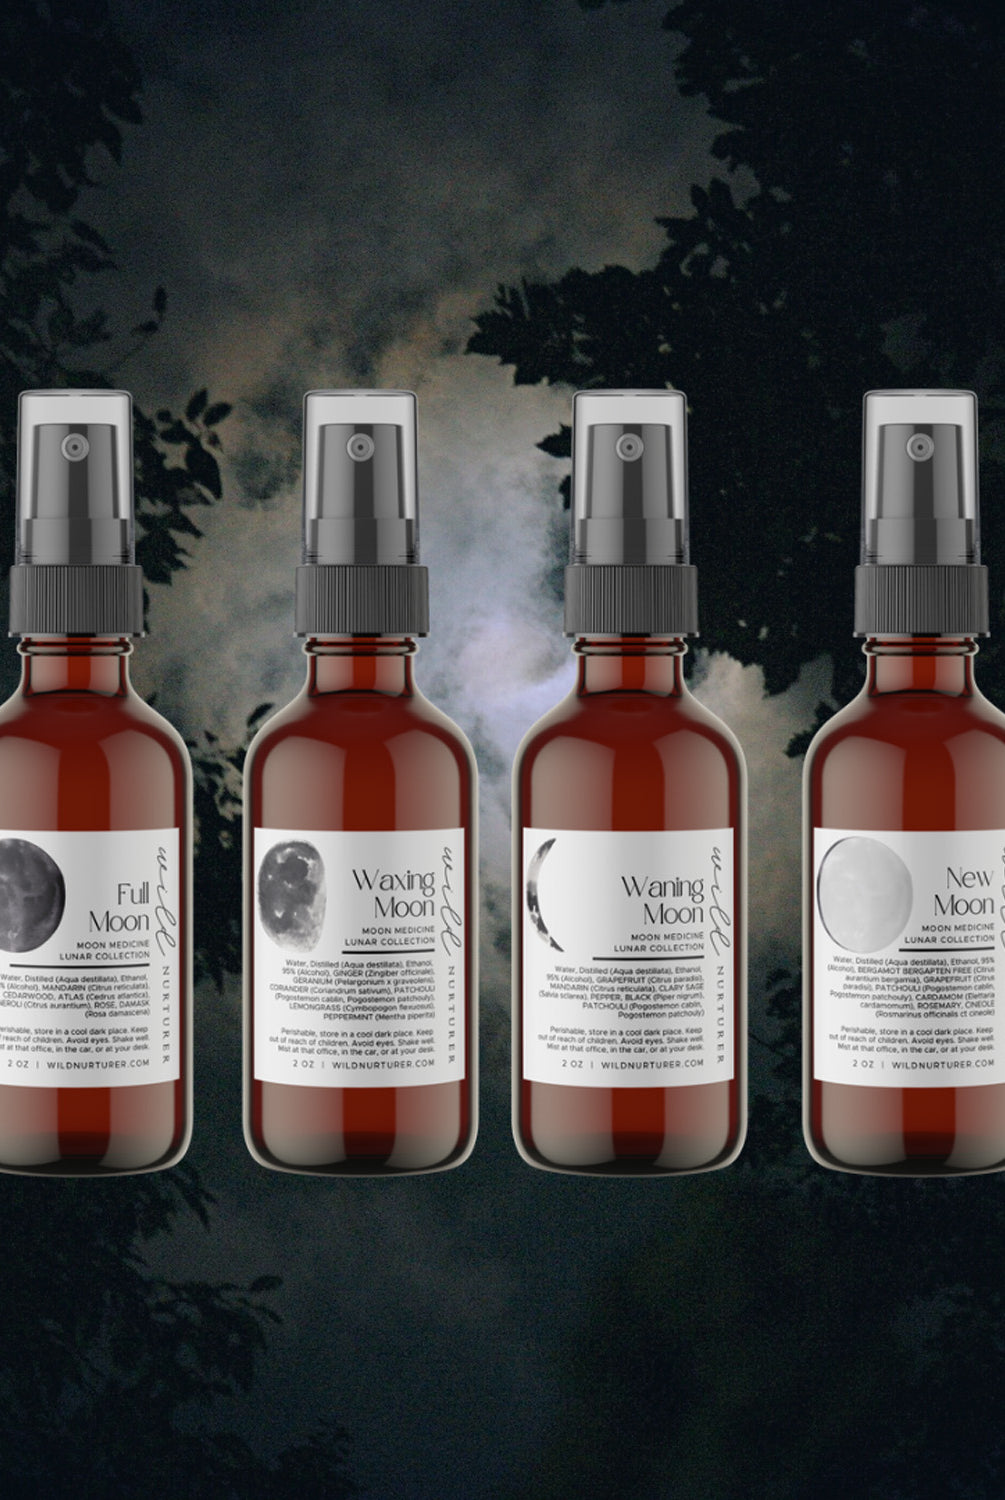 Five bottles of Moon Medicine Collection essential oil skincare products with spray nozzles, labeled with moon phases, against a dark, misty forest background.